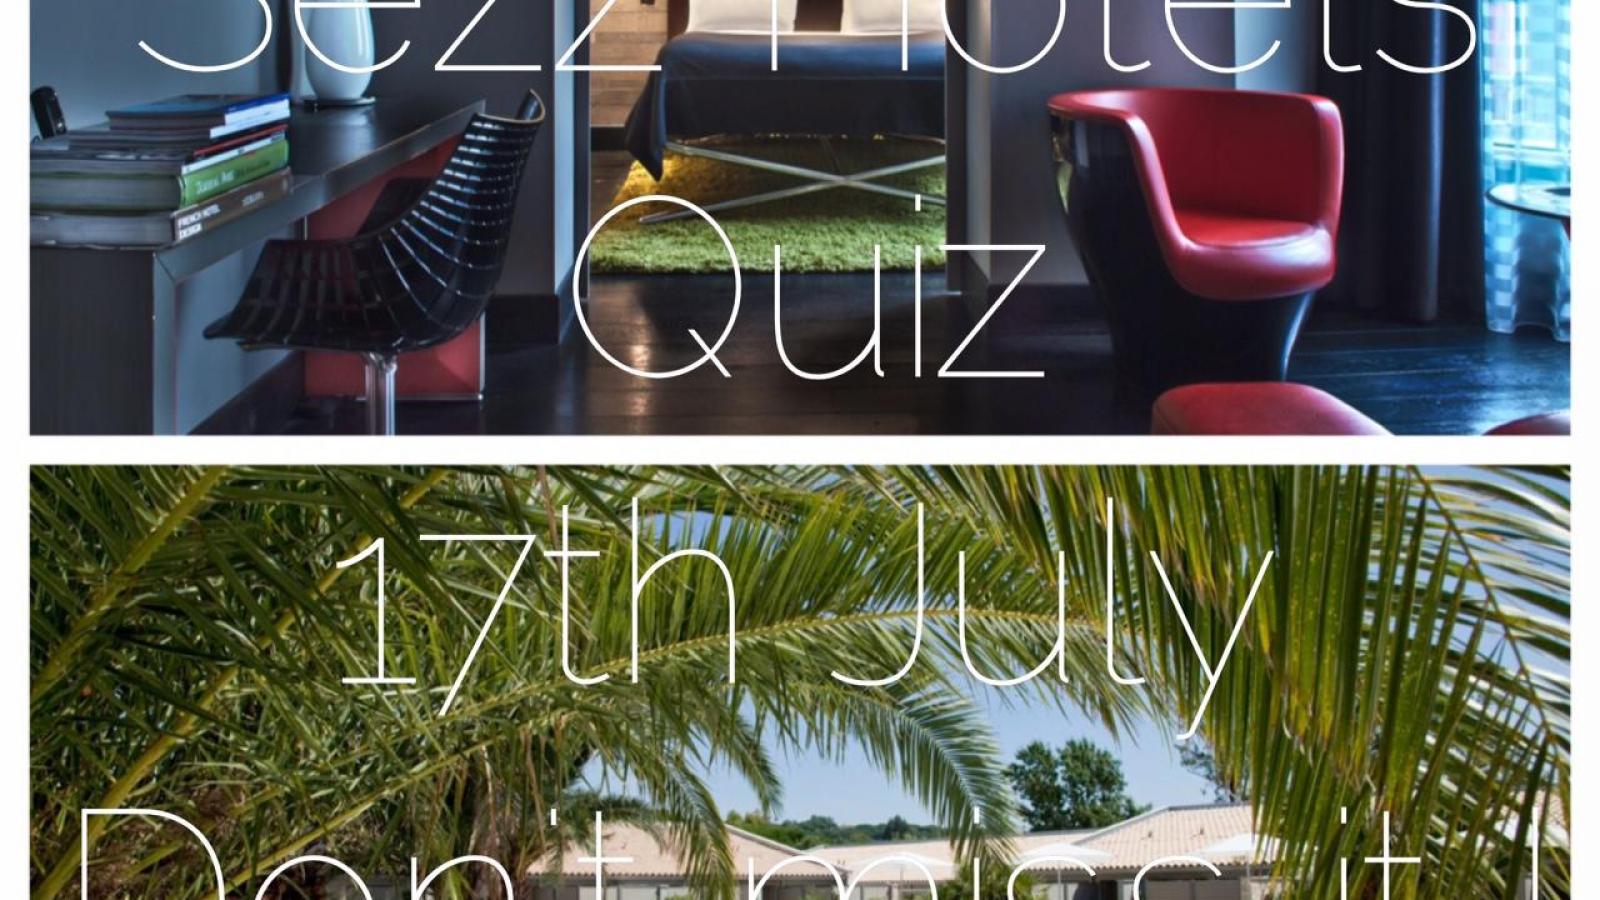 Sezz hotels quiz on our Facebook page !